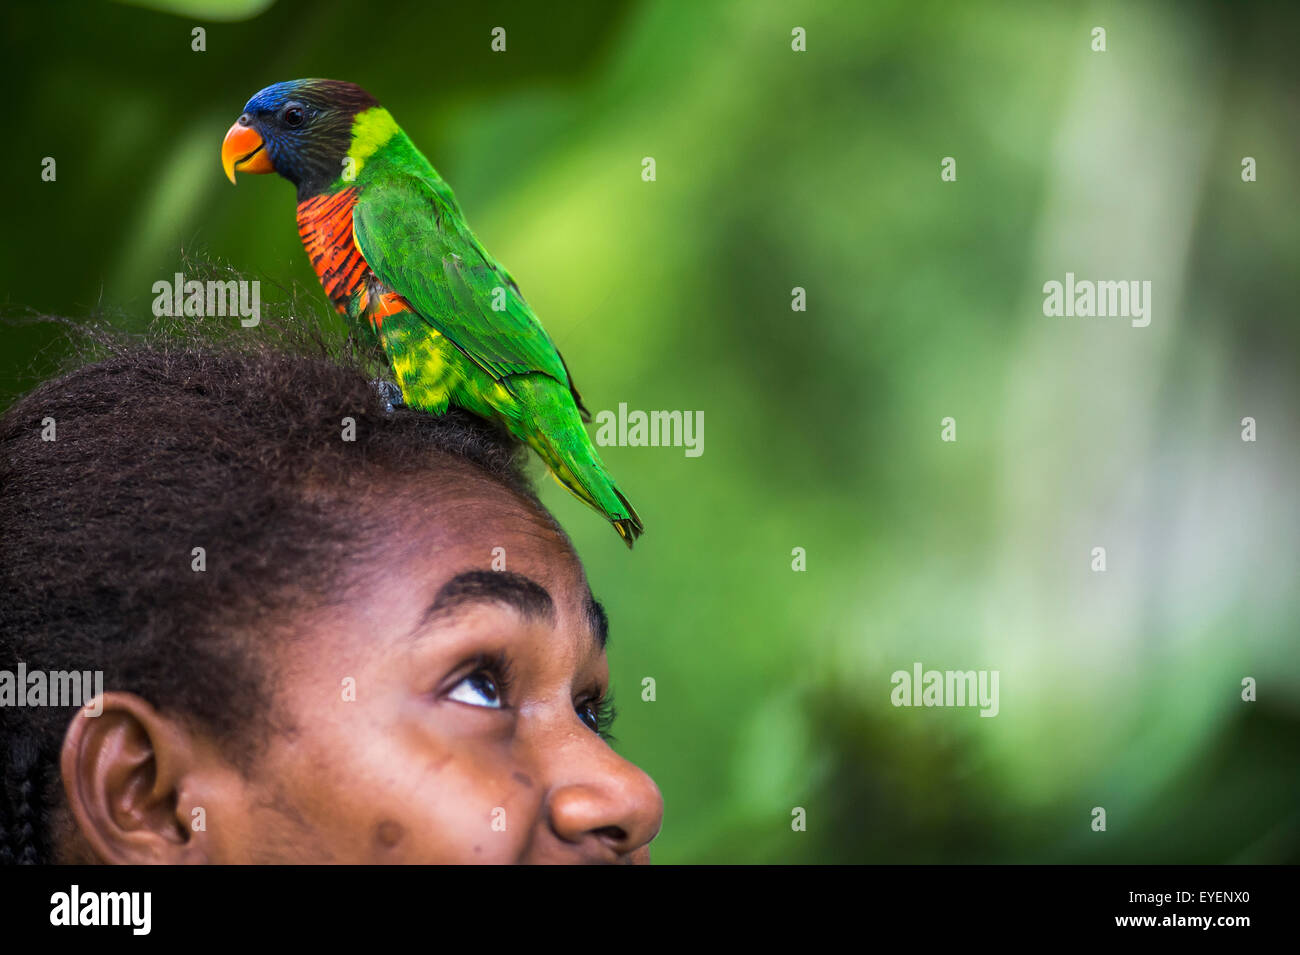 Young girl with a tropical bird resting on her head; Pentacost island, Vanuatu Stock Photo